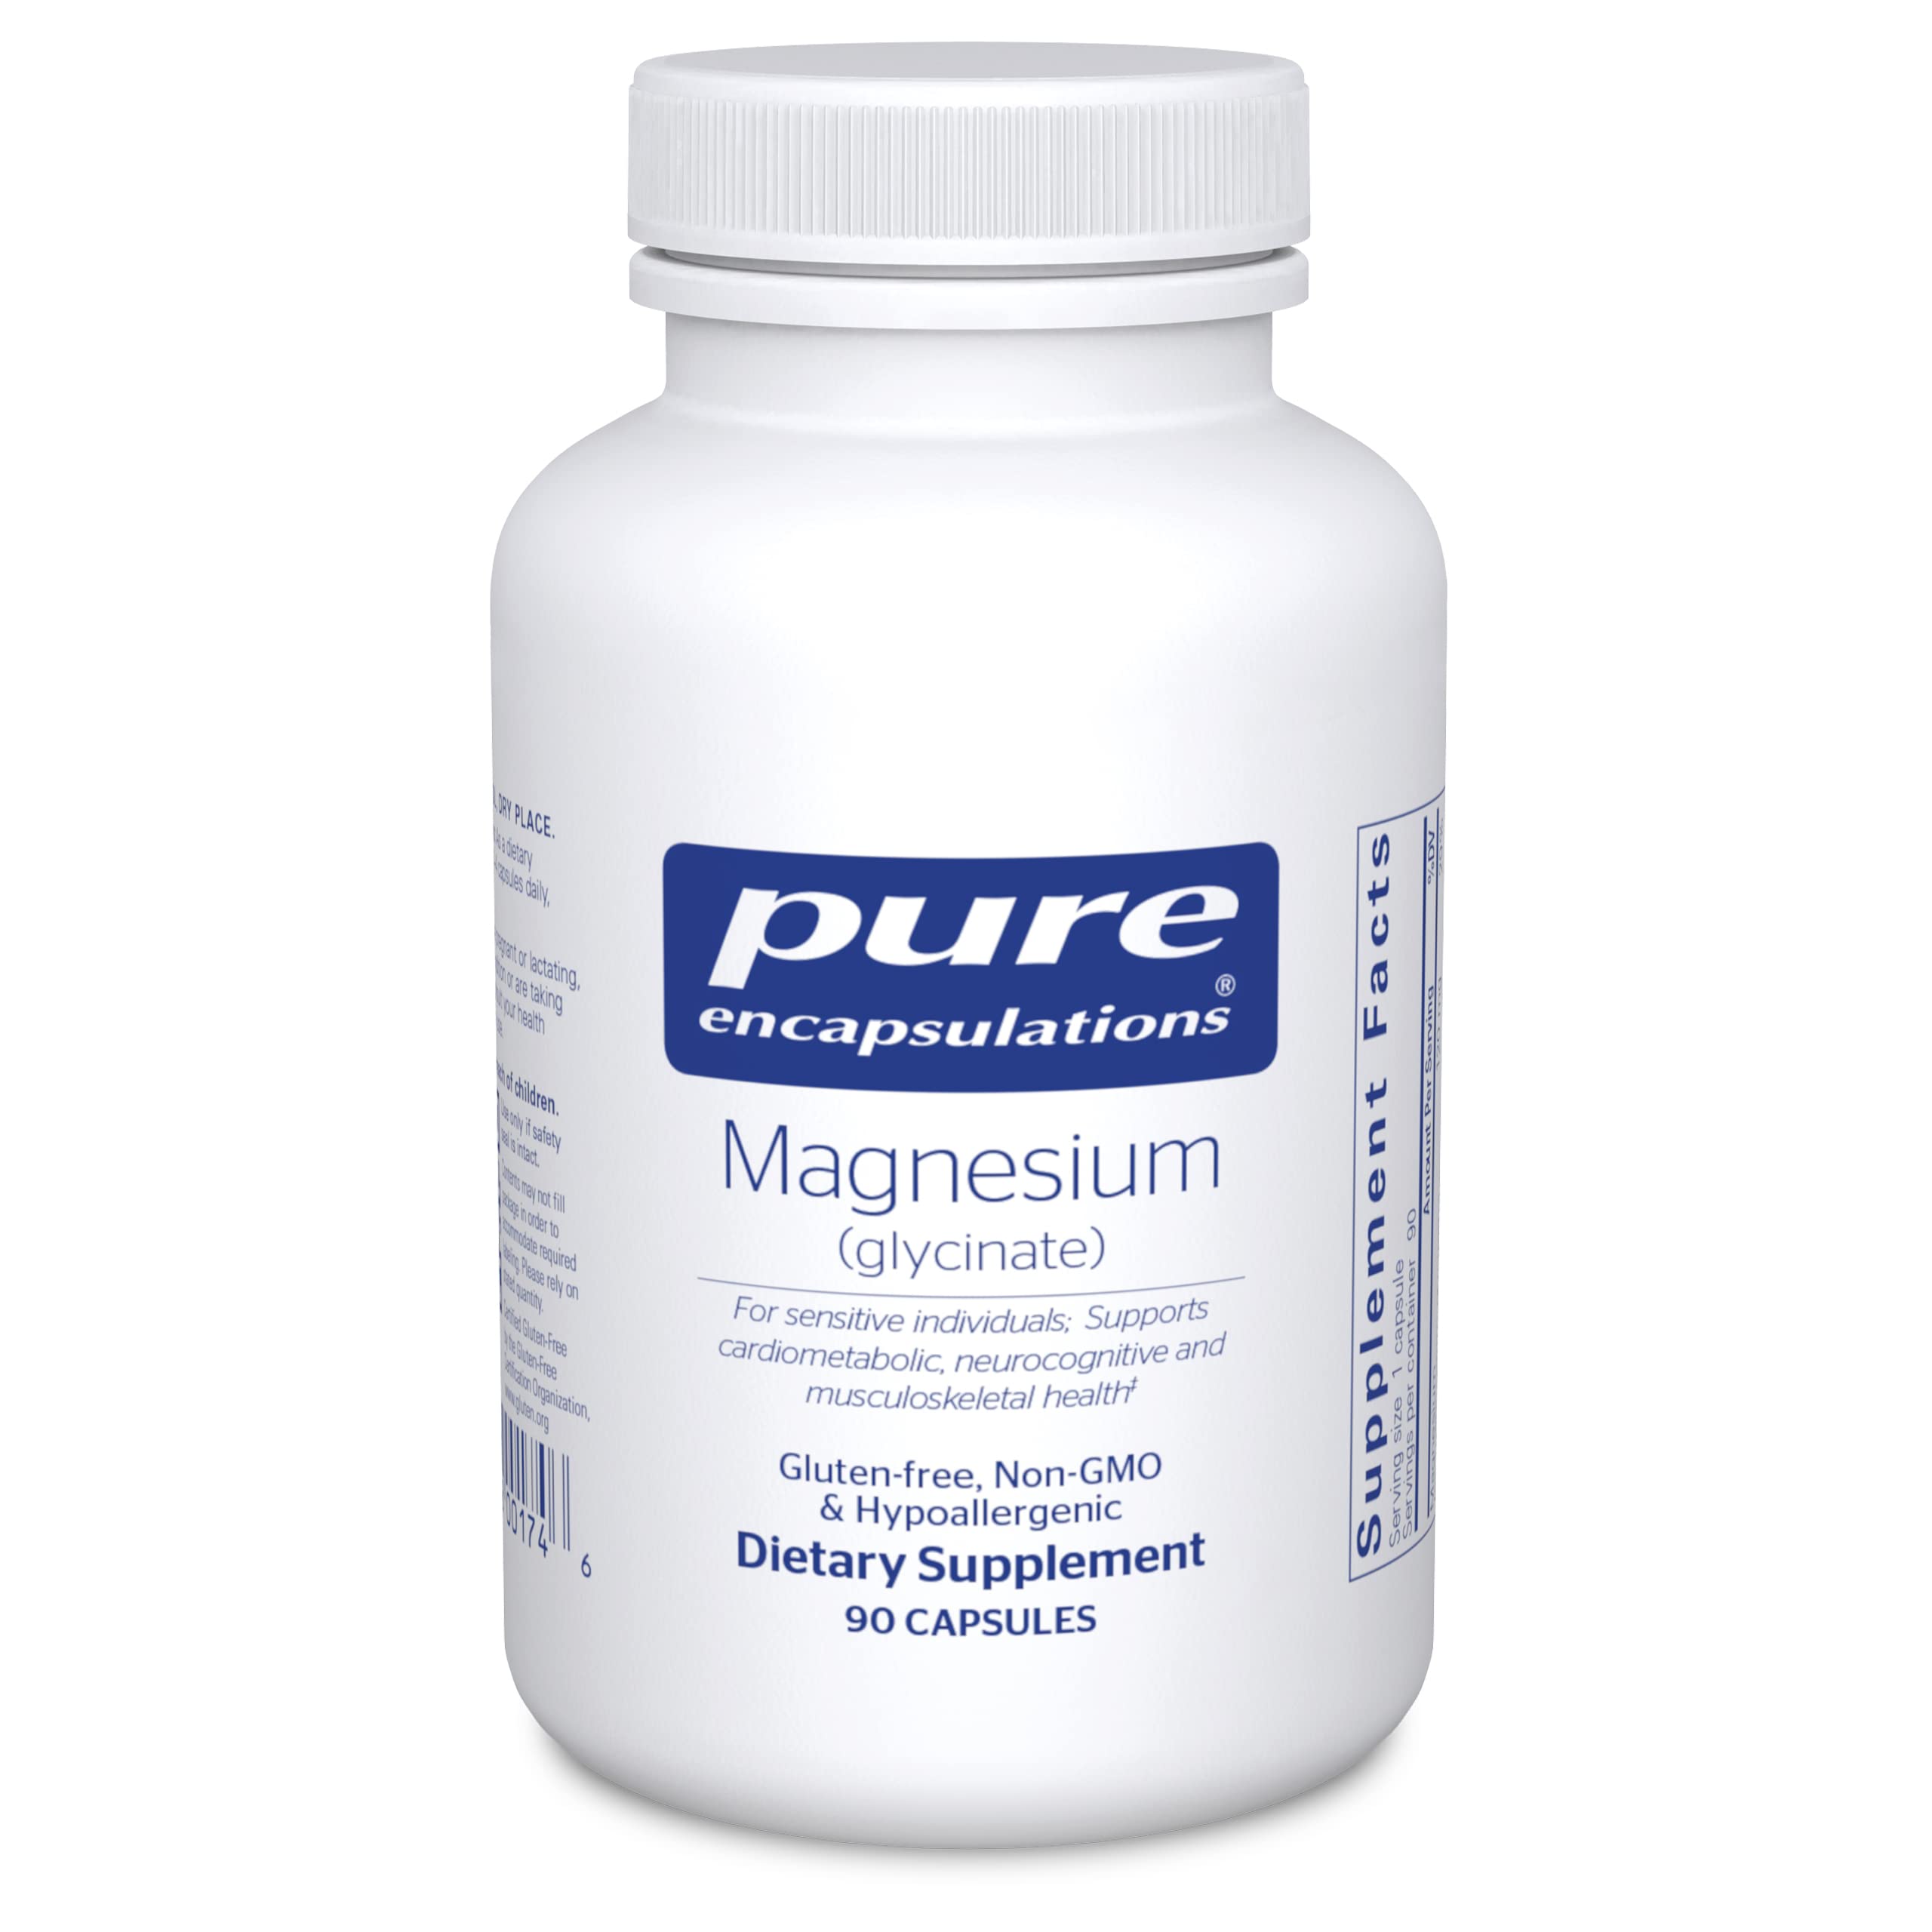 Pure Encapsulations Magnesium (Glycinate) - Supplement to Support Stress Relief, Sleep, Heart Health, Nerves, Muscles, and Metabolism* - with Magnesium Glycinate - 90 Capsules